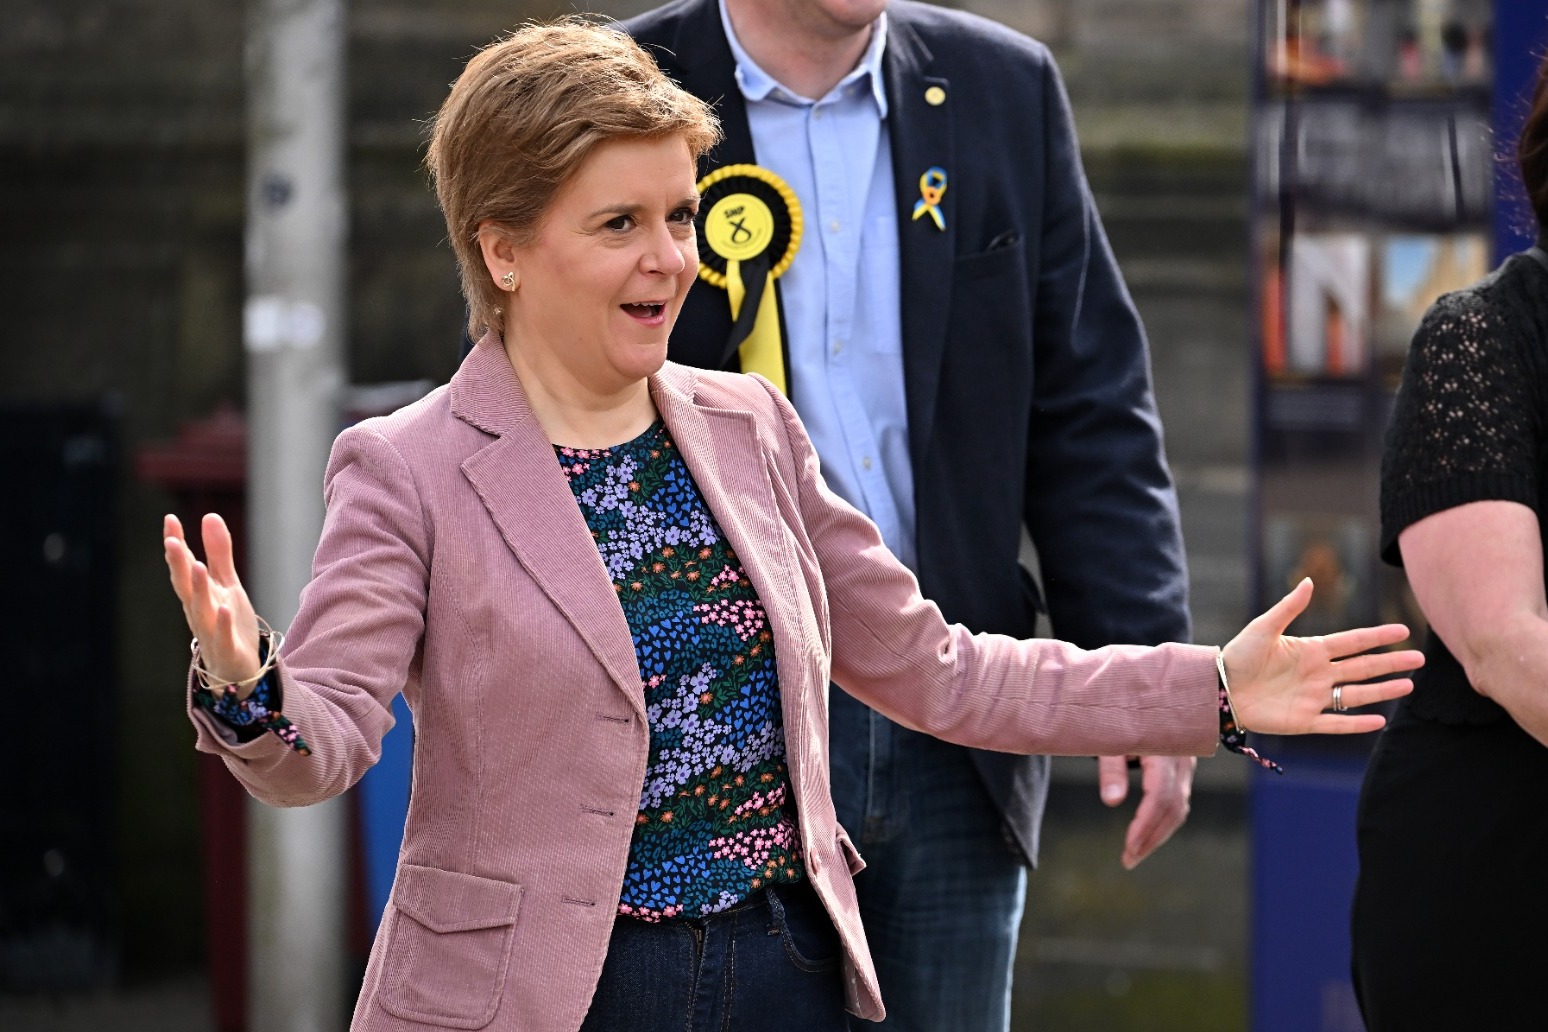 Sturgeon ‘convinced’ Scots would vote for independence despite poll downturn 